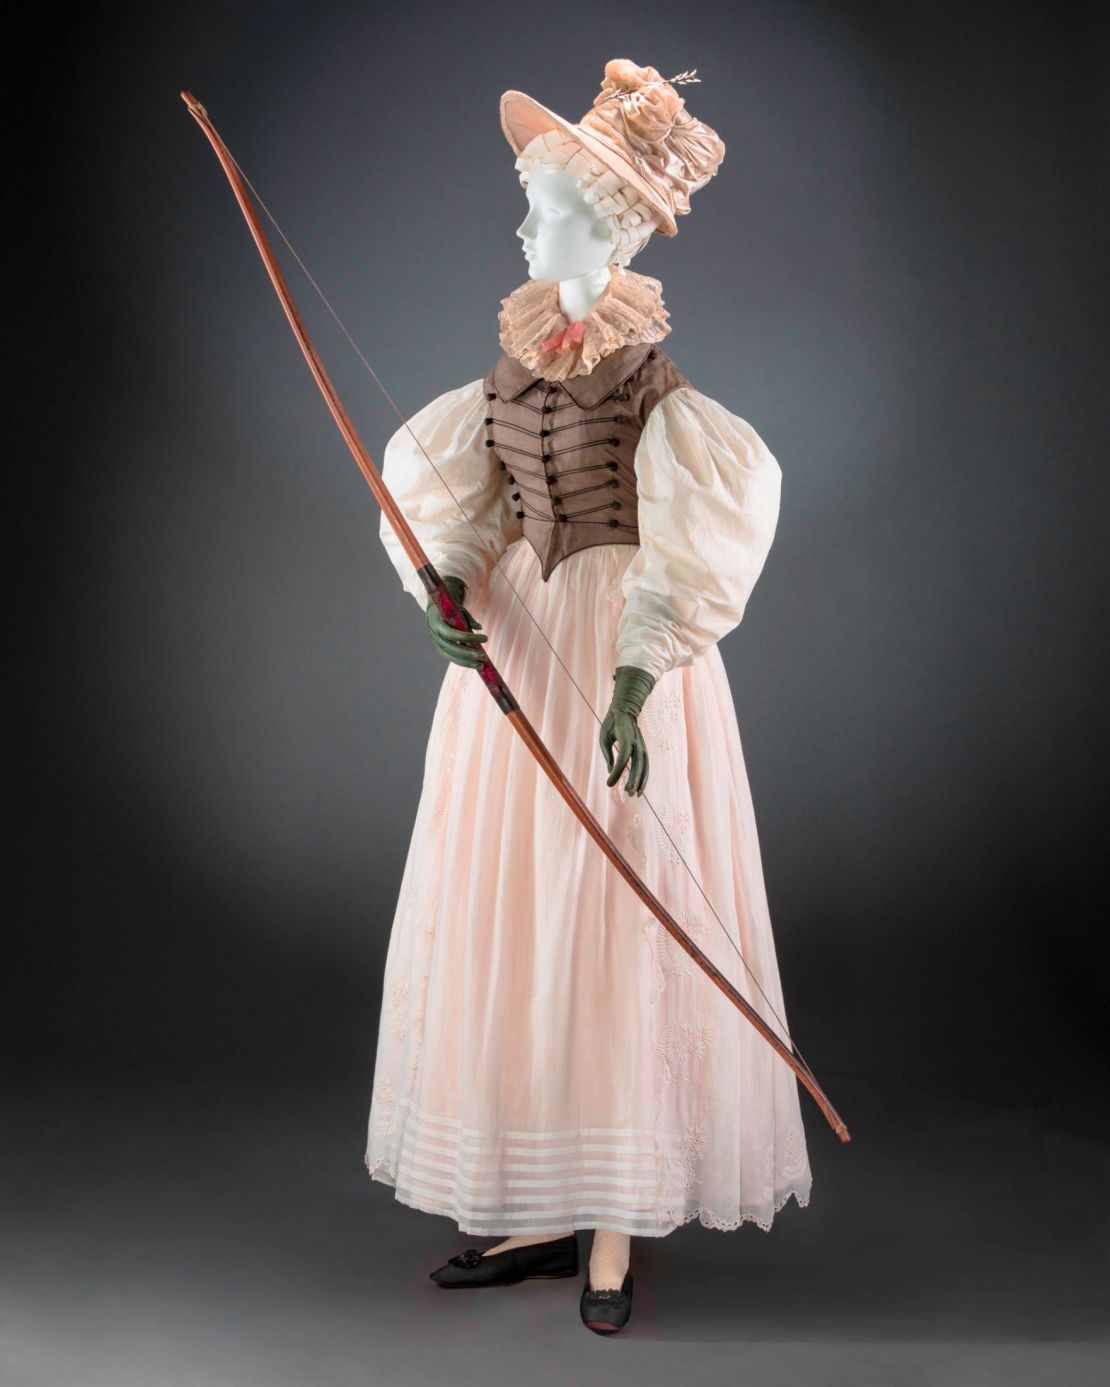 An archery ensemble from the 1820s.